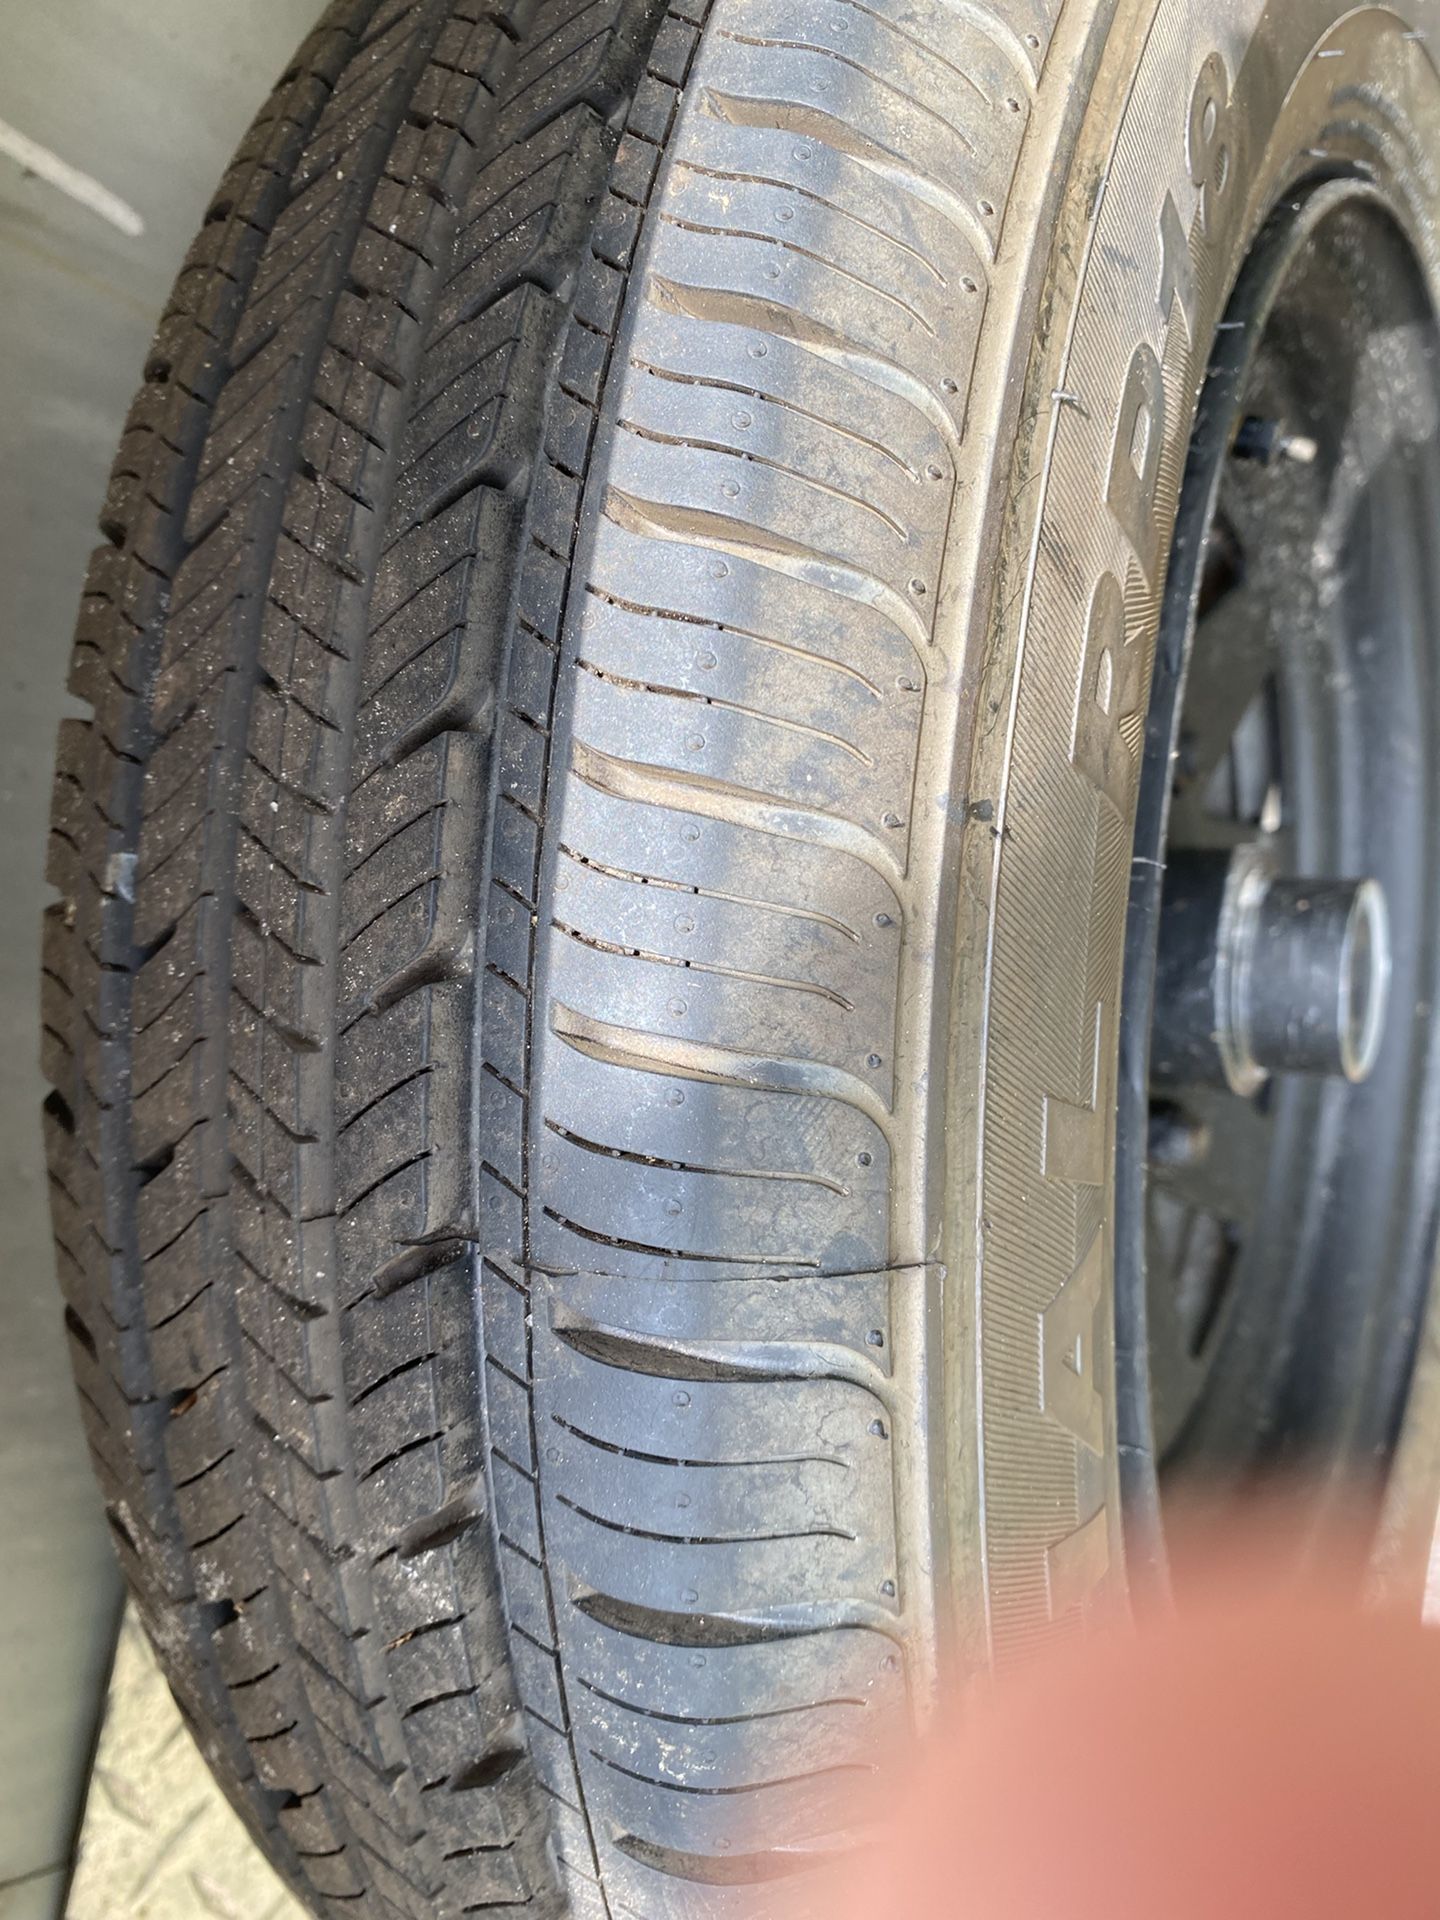 2 Tires P155/80R13 90% tread used for 1 trip